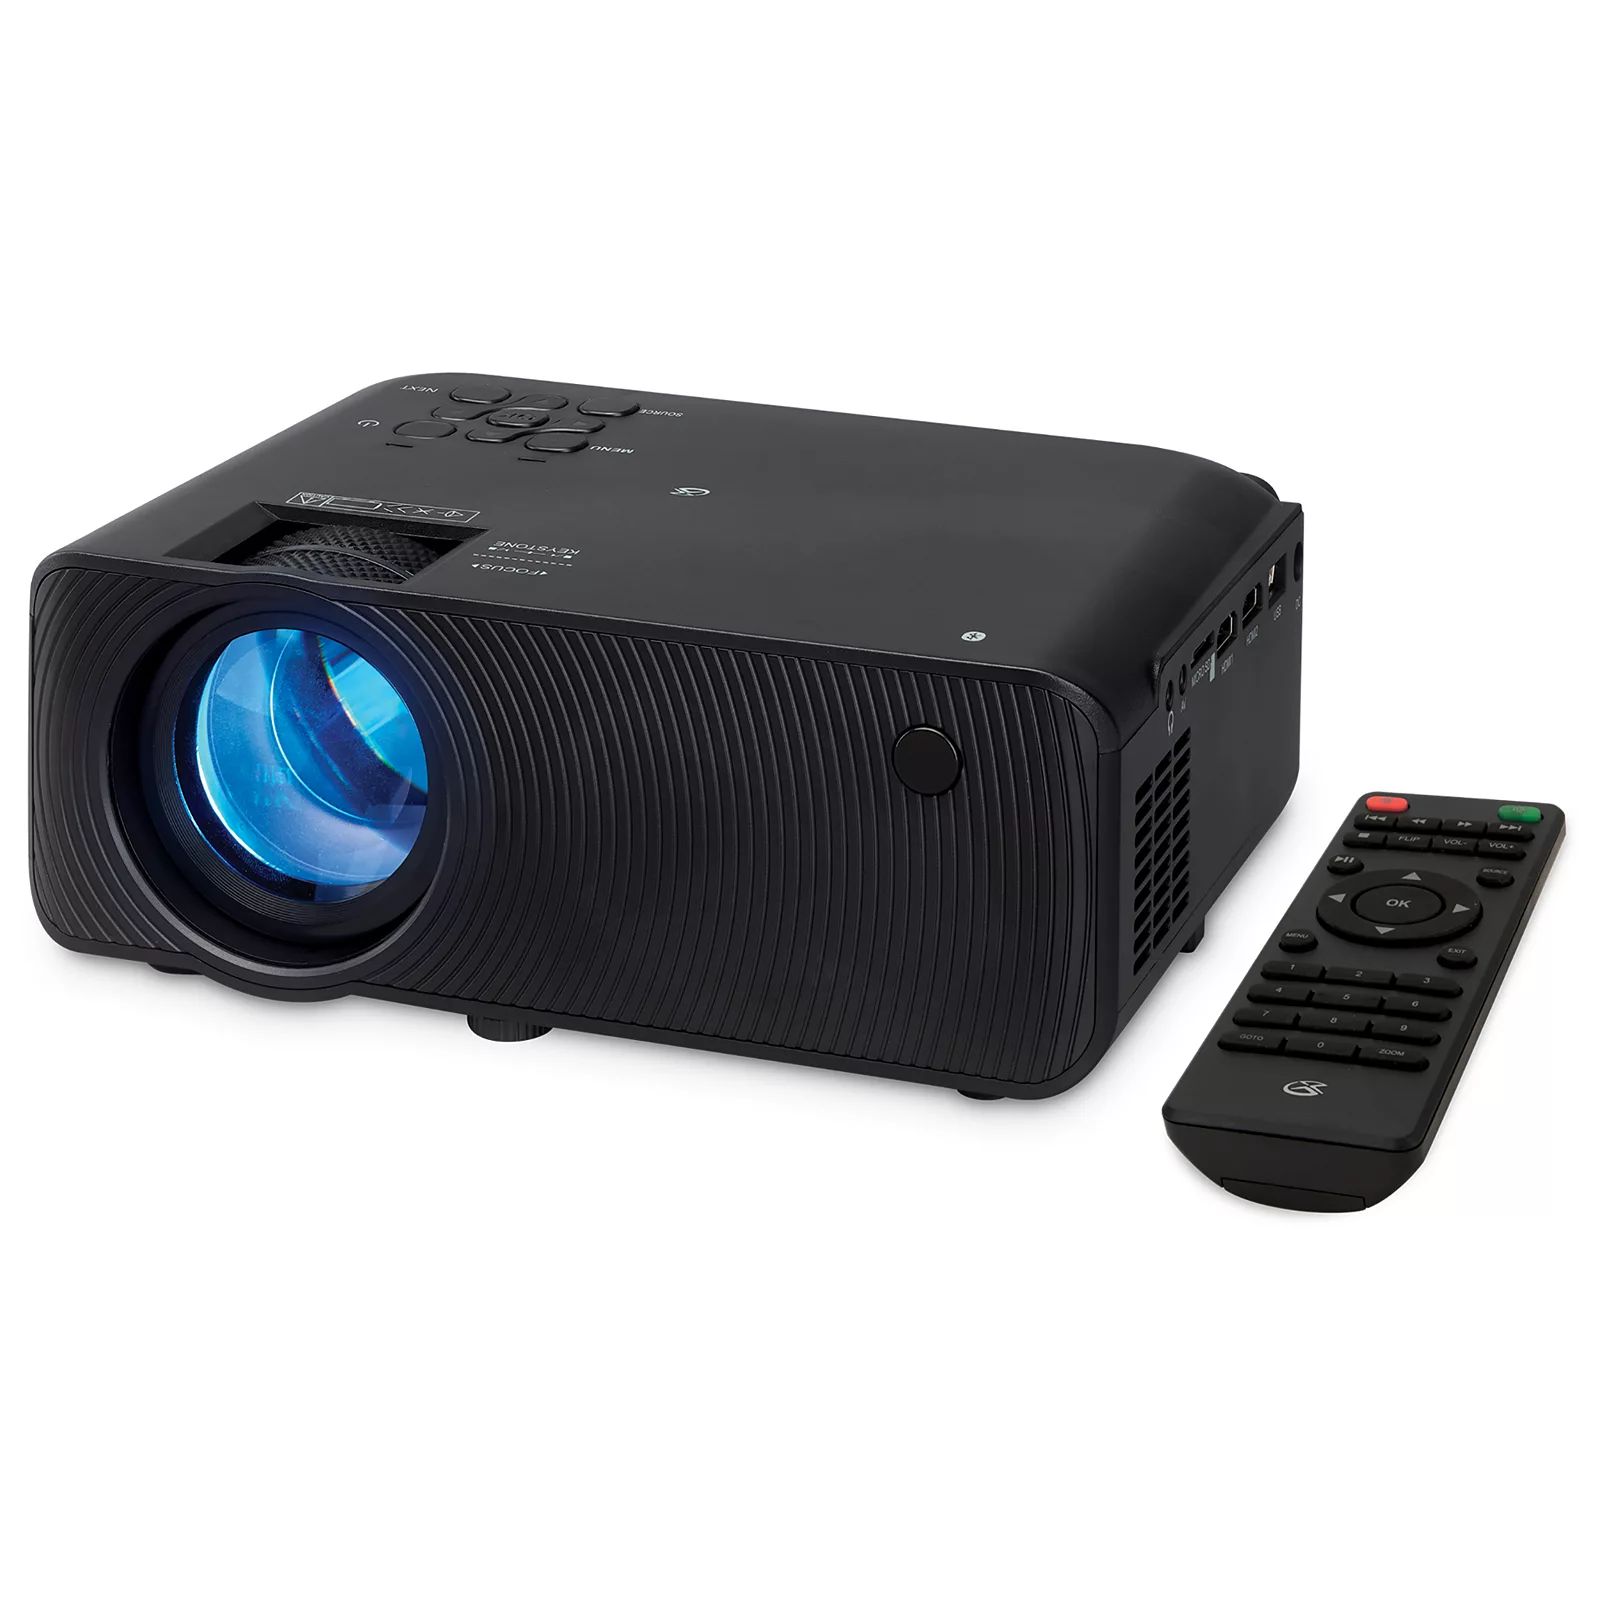 GPX Mini Projector with Bluetooth, Black | Kohl's